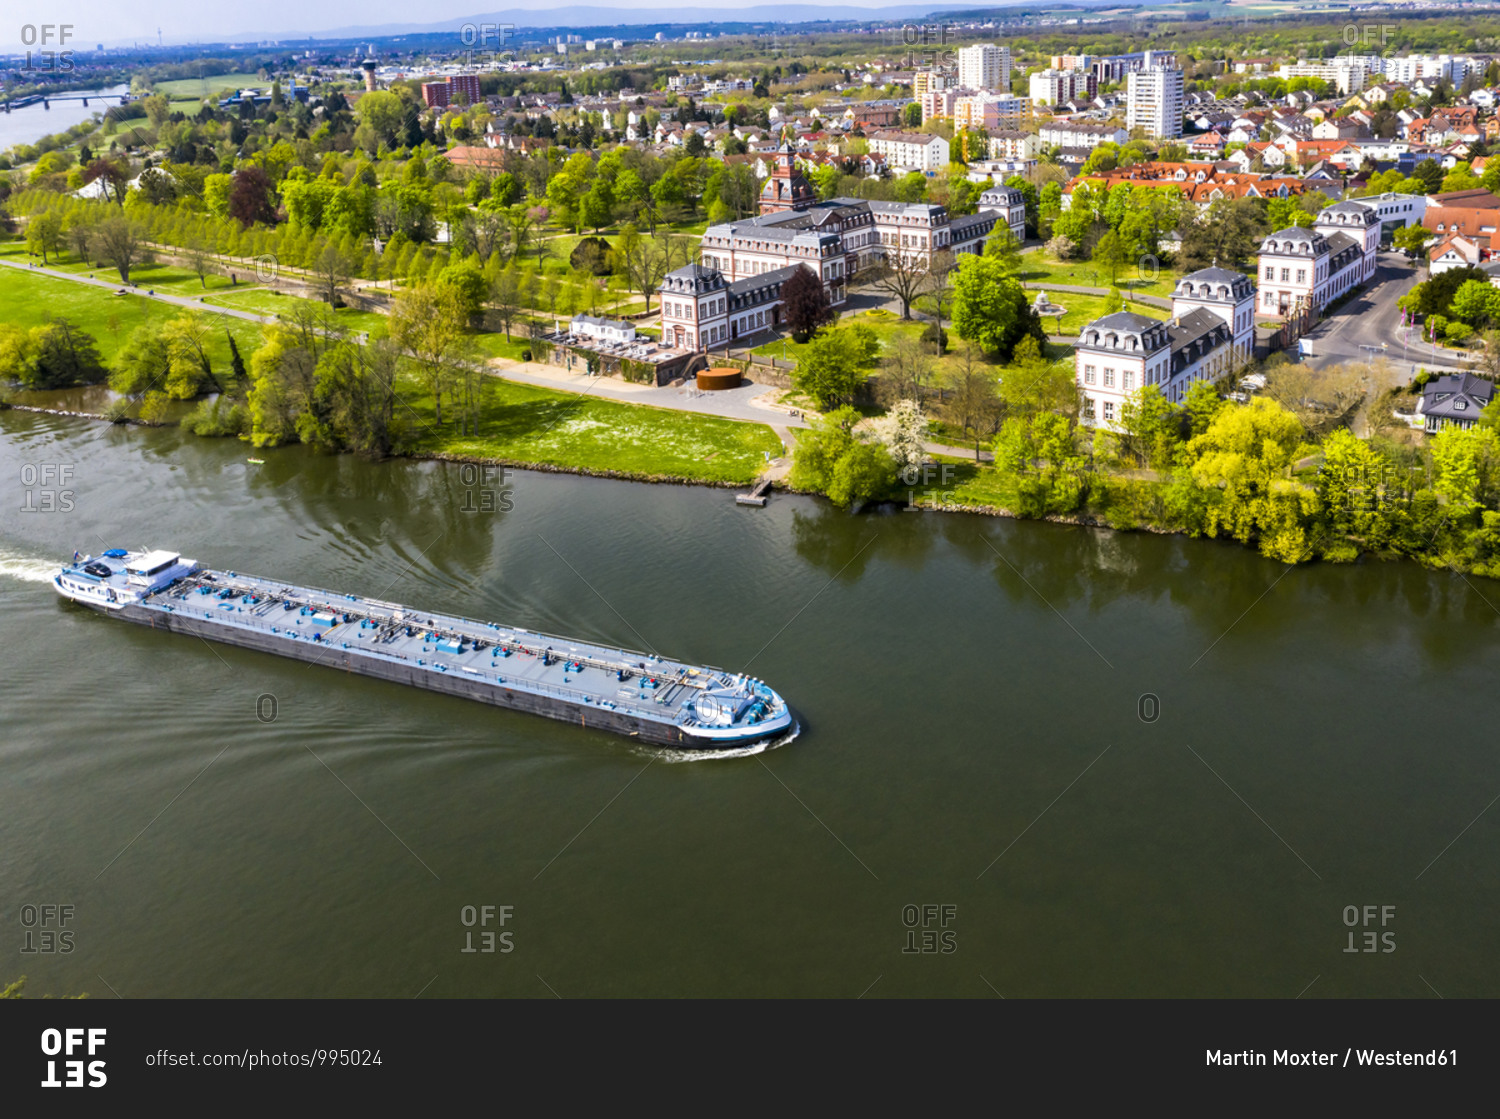 Germany- Hesse- Hanau- Helicopter view of barge passing riverside town in summer